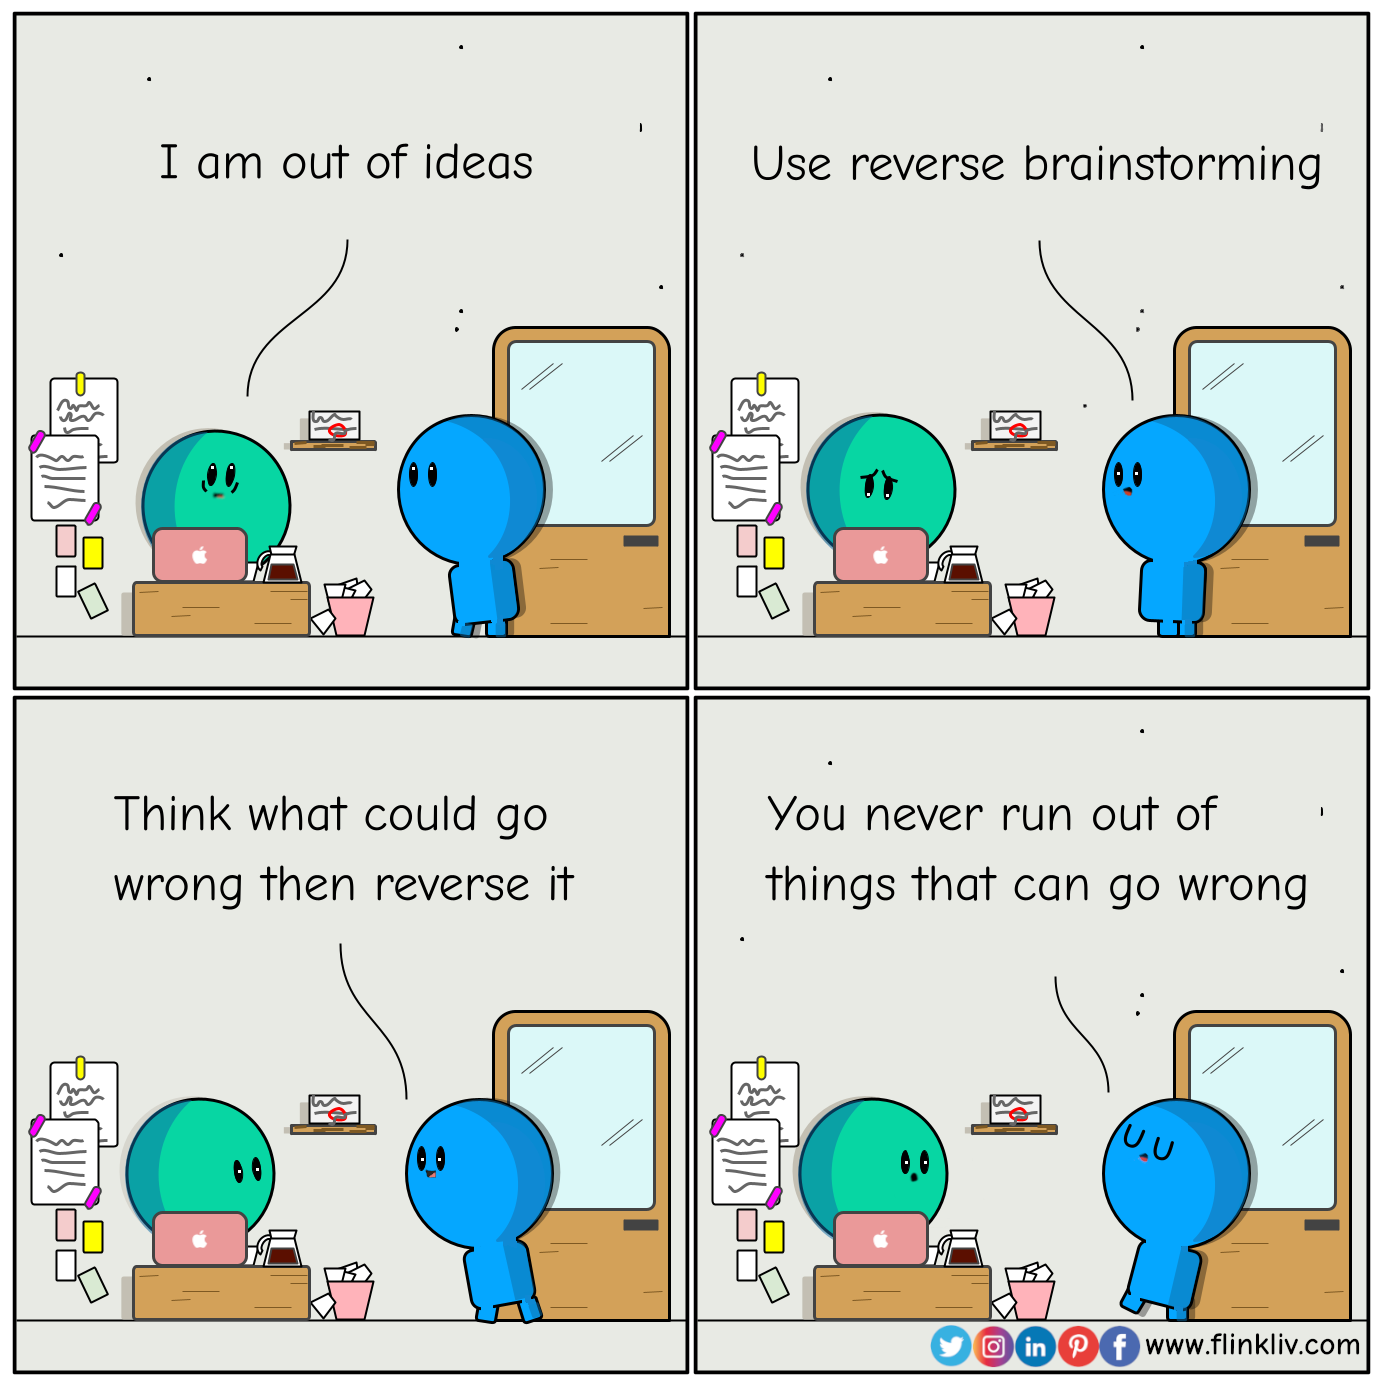 Conversation between A and B about reverse brainstorming.
			A: I am out of ideas
			B: Use reverse brainstorming
			B: Think what could go wrong then reverse it
			B: You never run out of things that can go wrong.
			